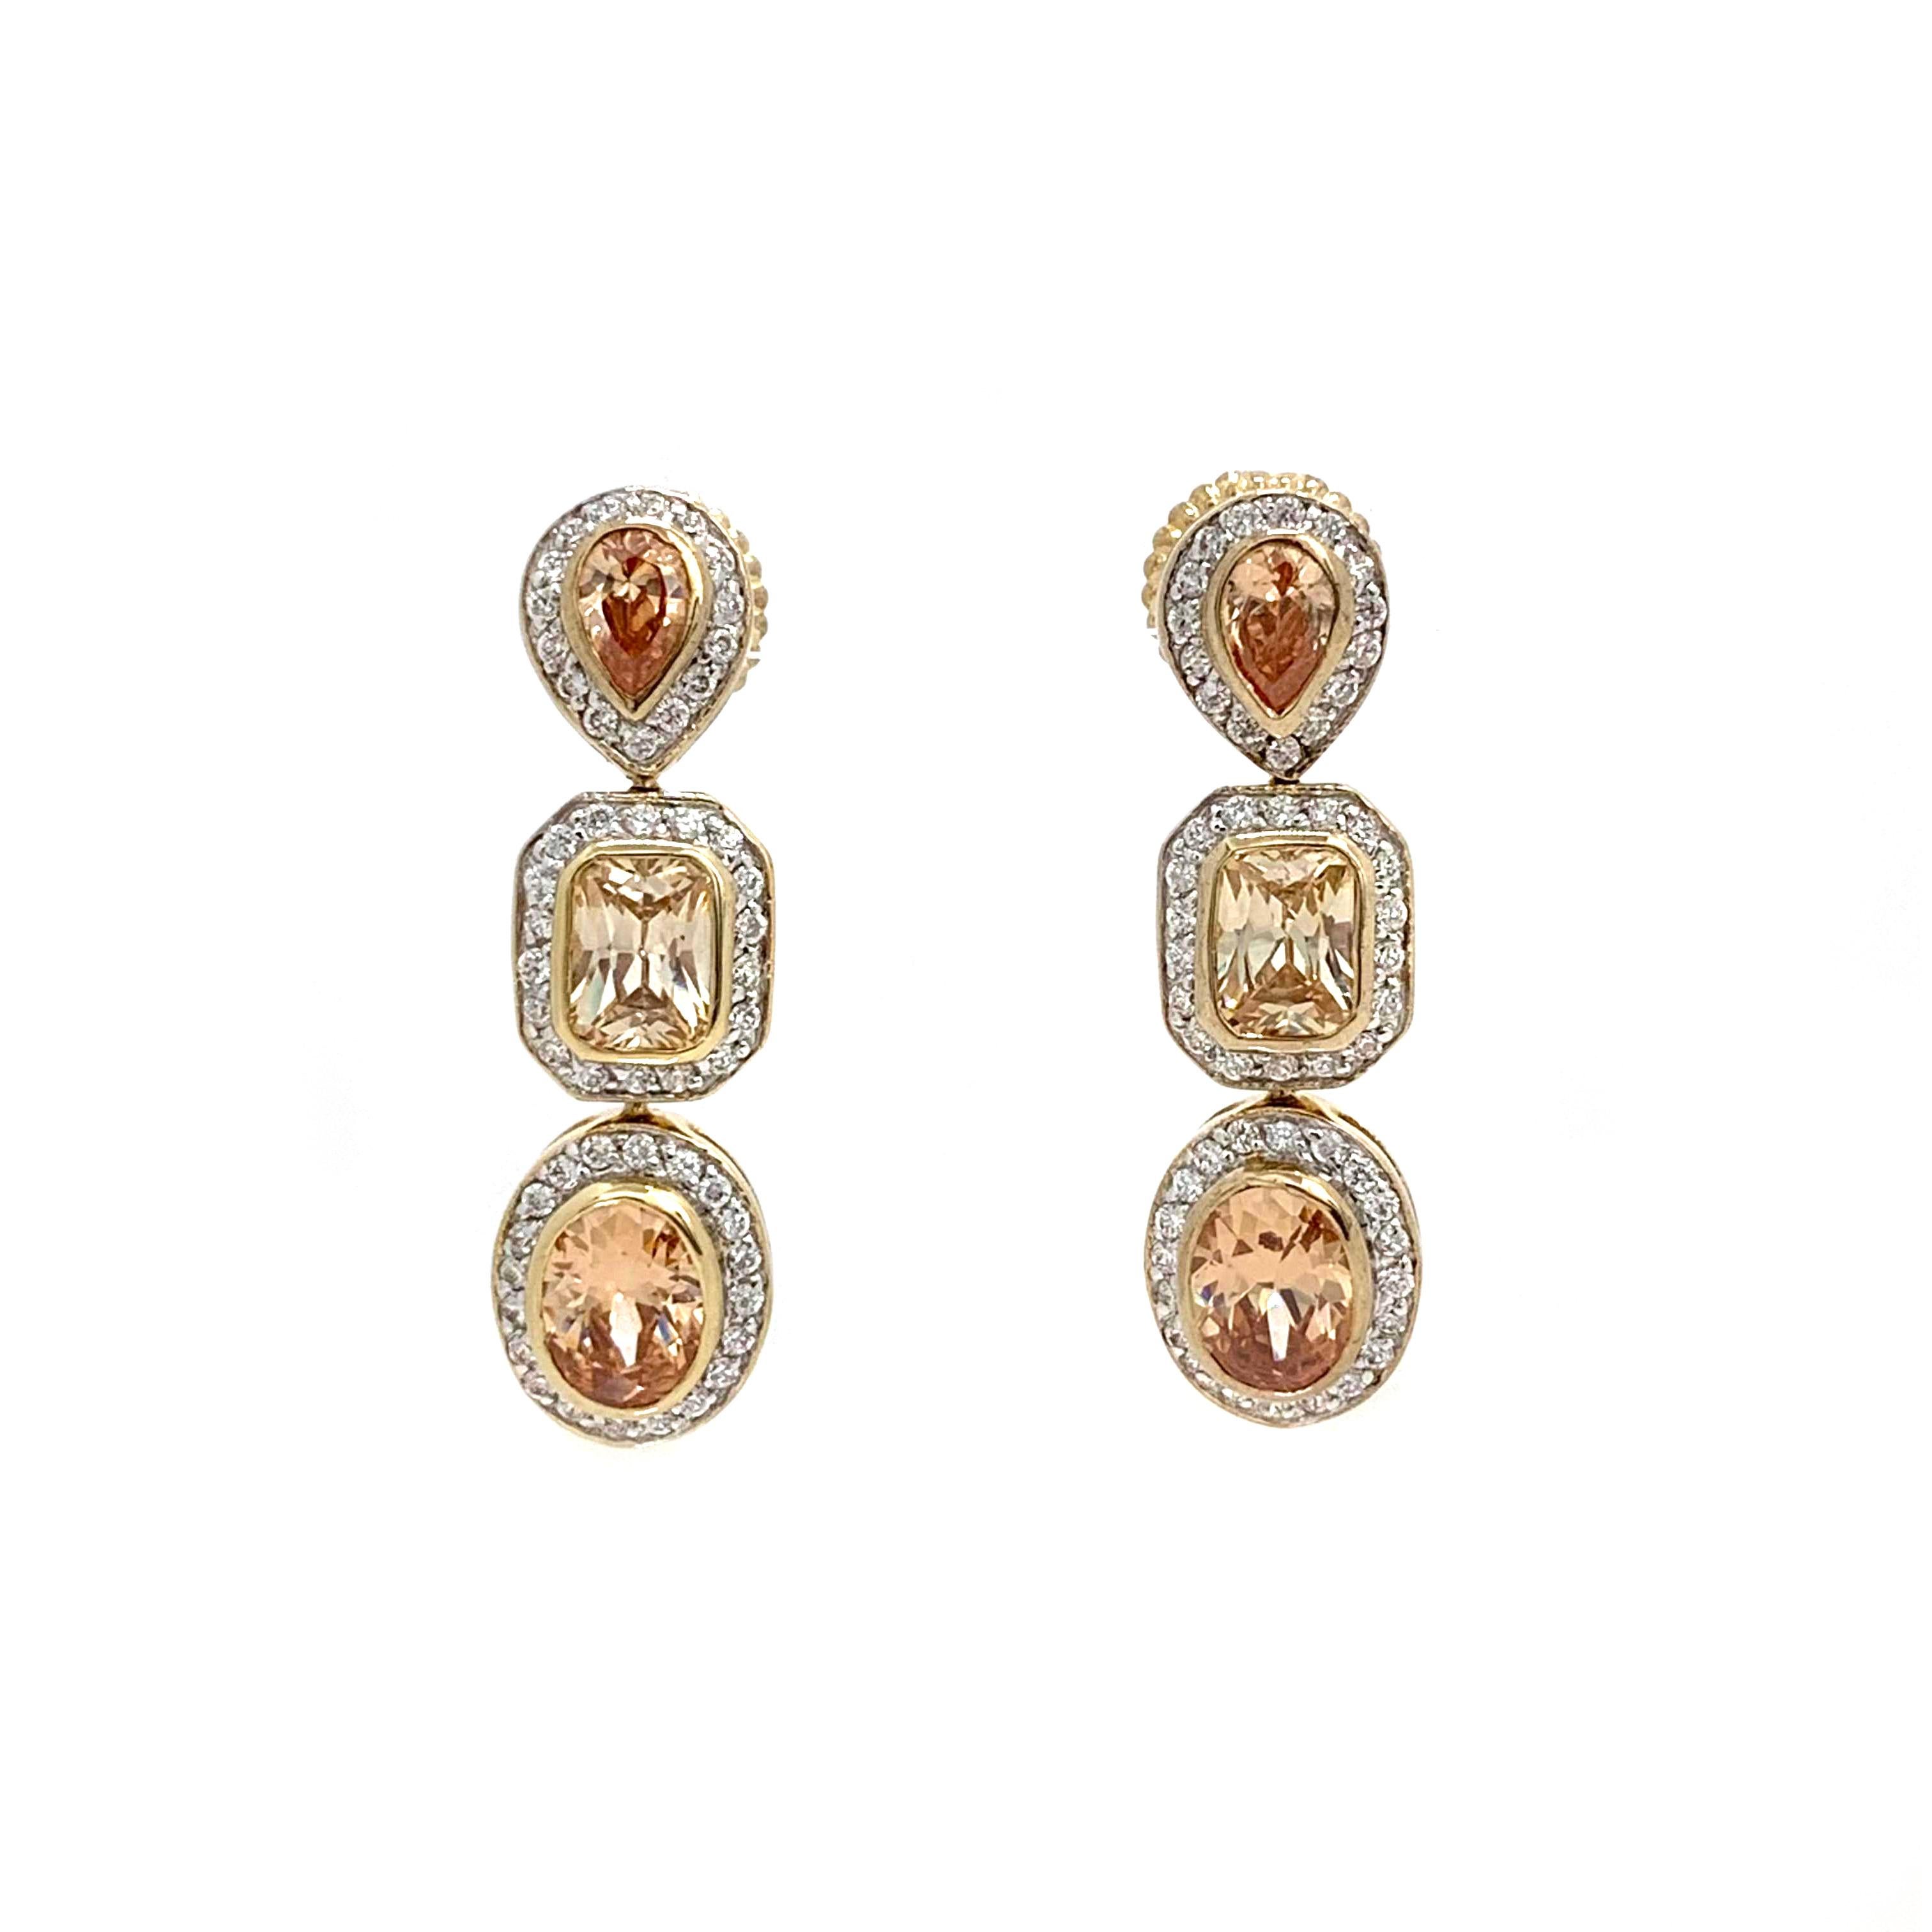 Beautiful triple faux champagne diamond adorned with round Cubic Zirconia drop earrings. 18k gold finished. Straight post with large friction back. Marked: Jarin

1-3/8